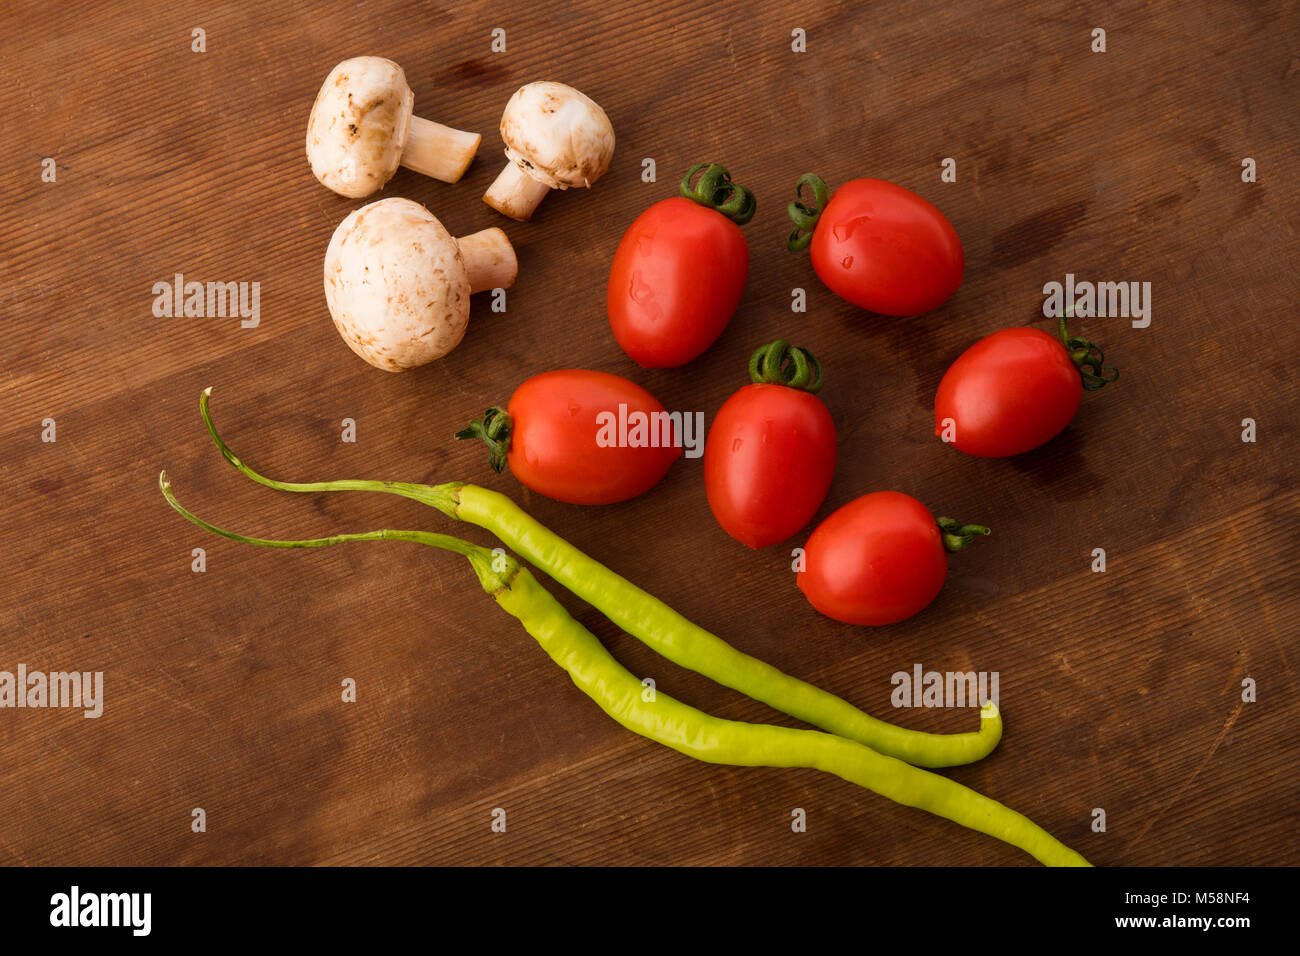 Vegetable: Top View of Fresh Red Baby Tomatoes , Button Mushrooms and Green Chilies on Brown Wooden Background Stock Photo